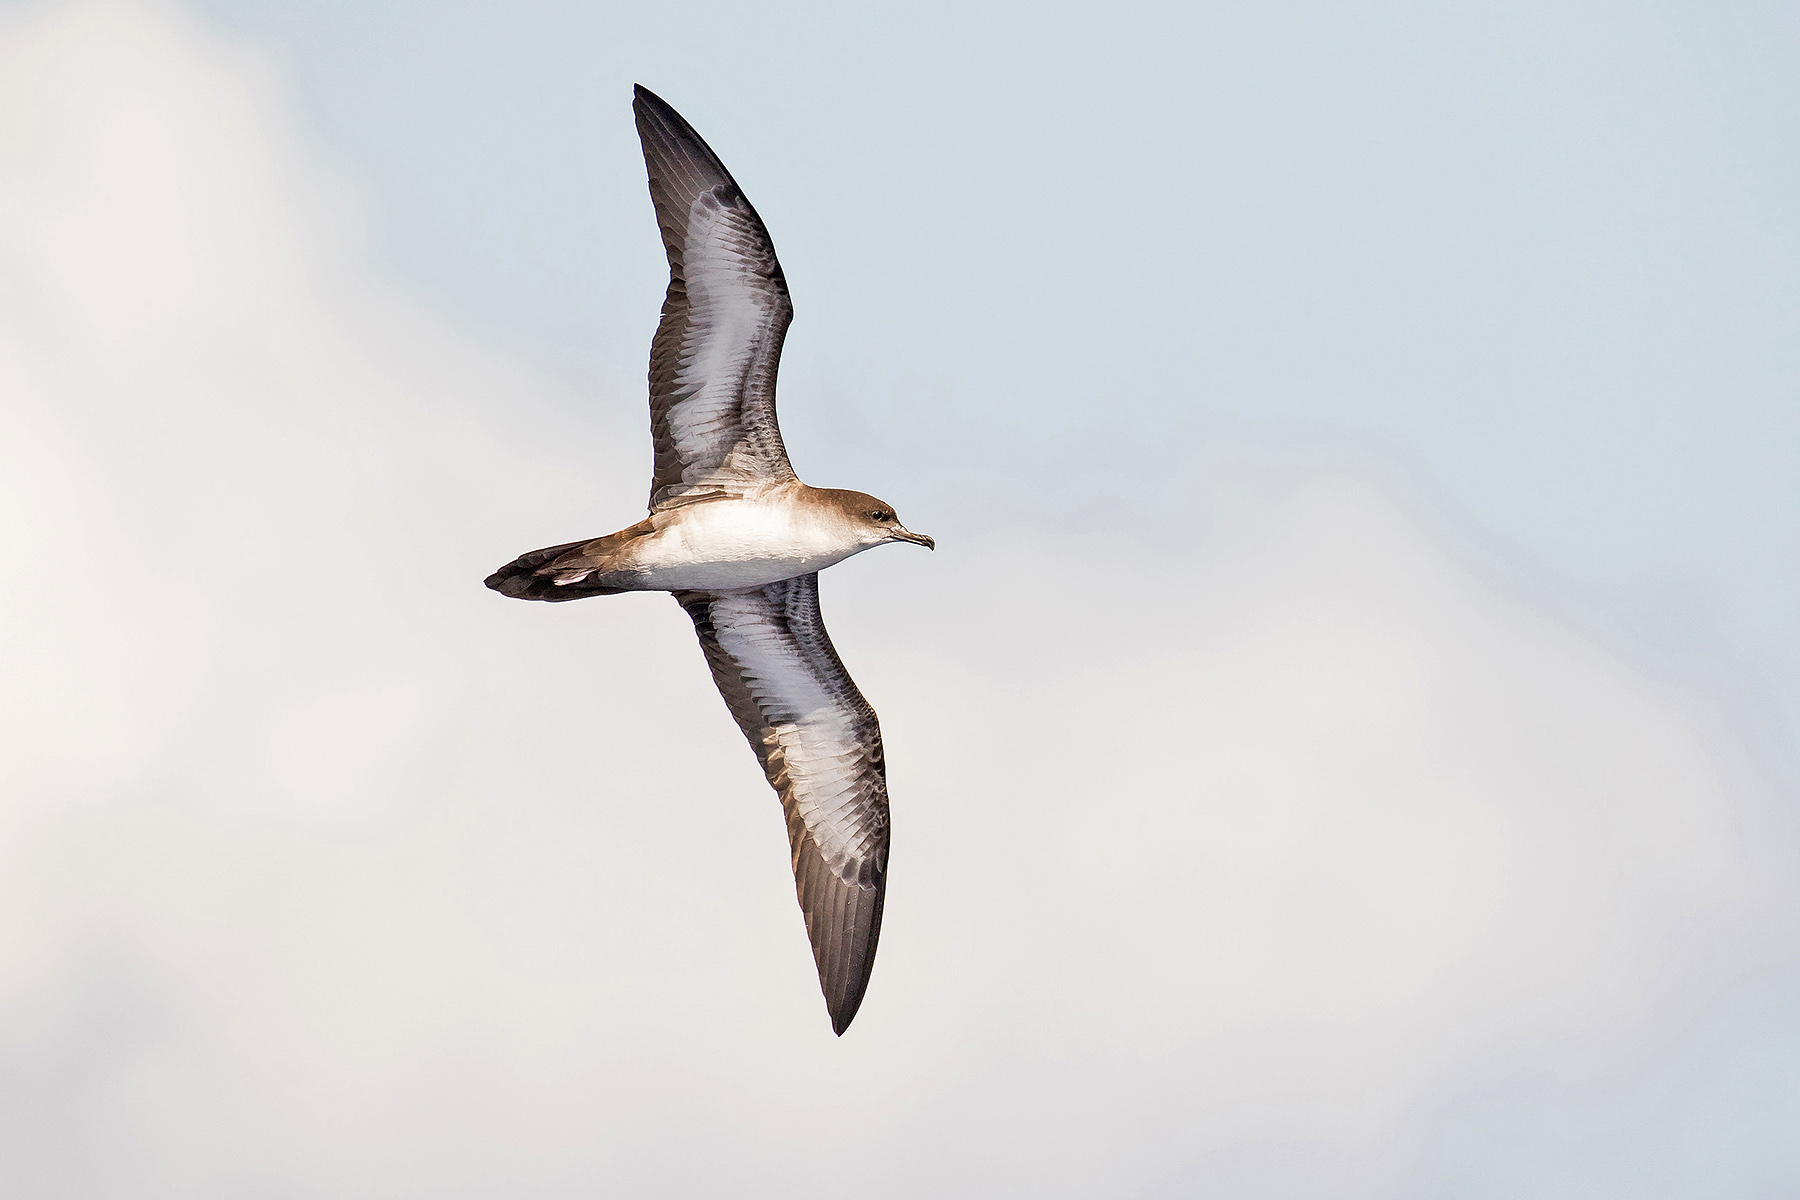 Wedge-tailed Shearwater (image by Pete Morris)